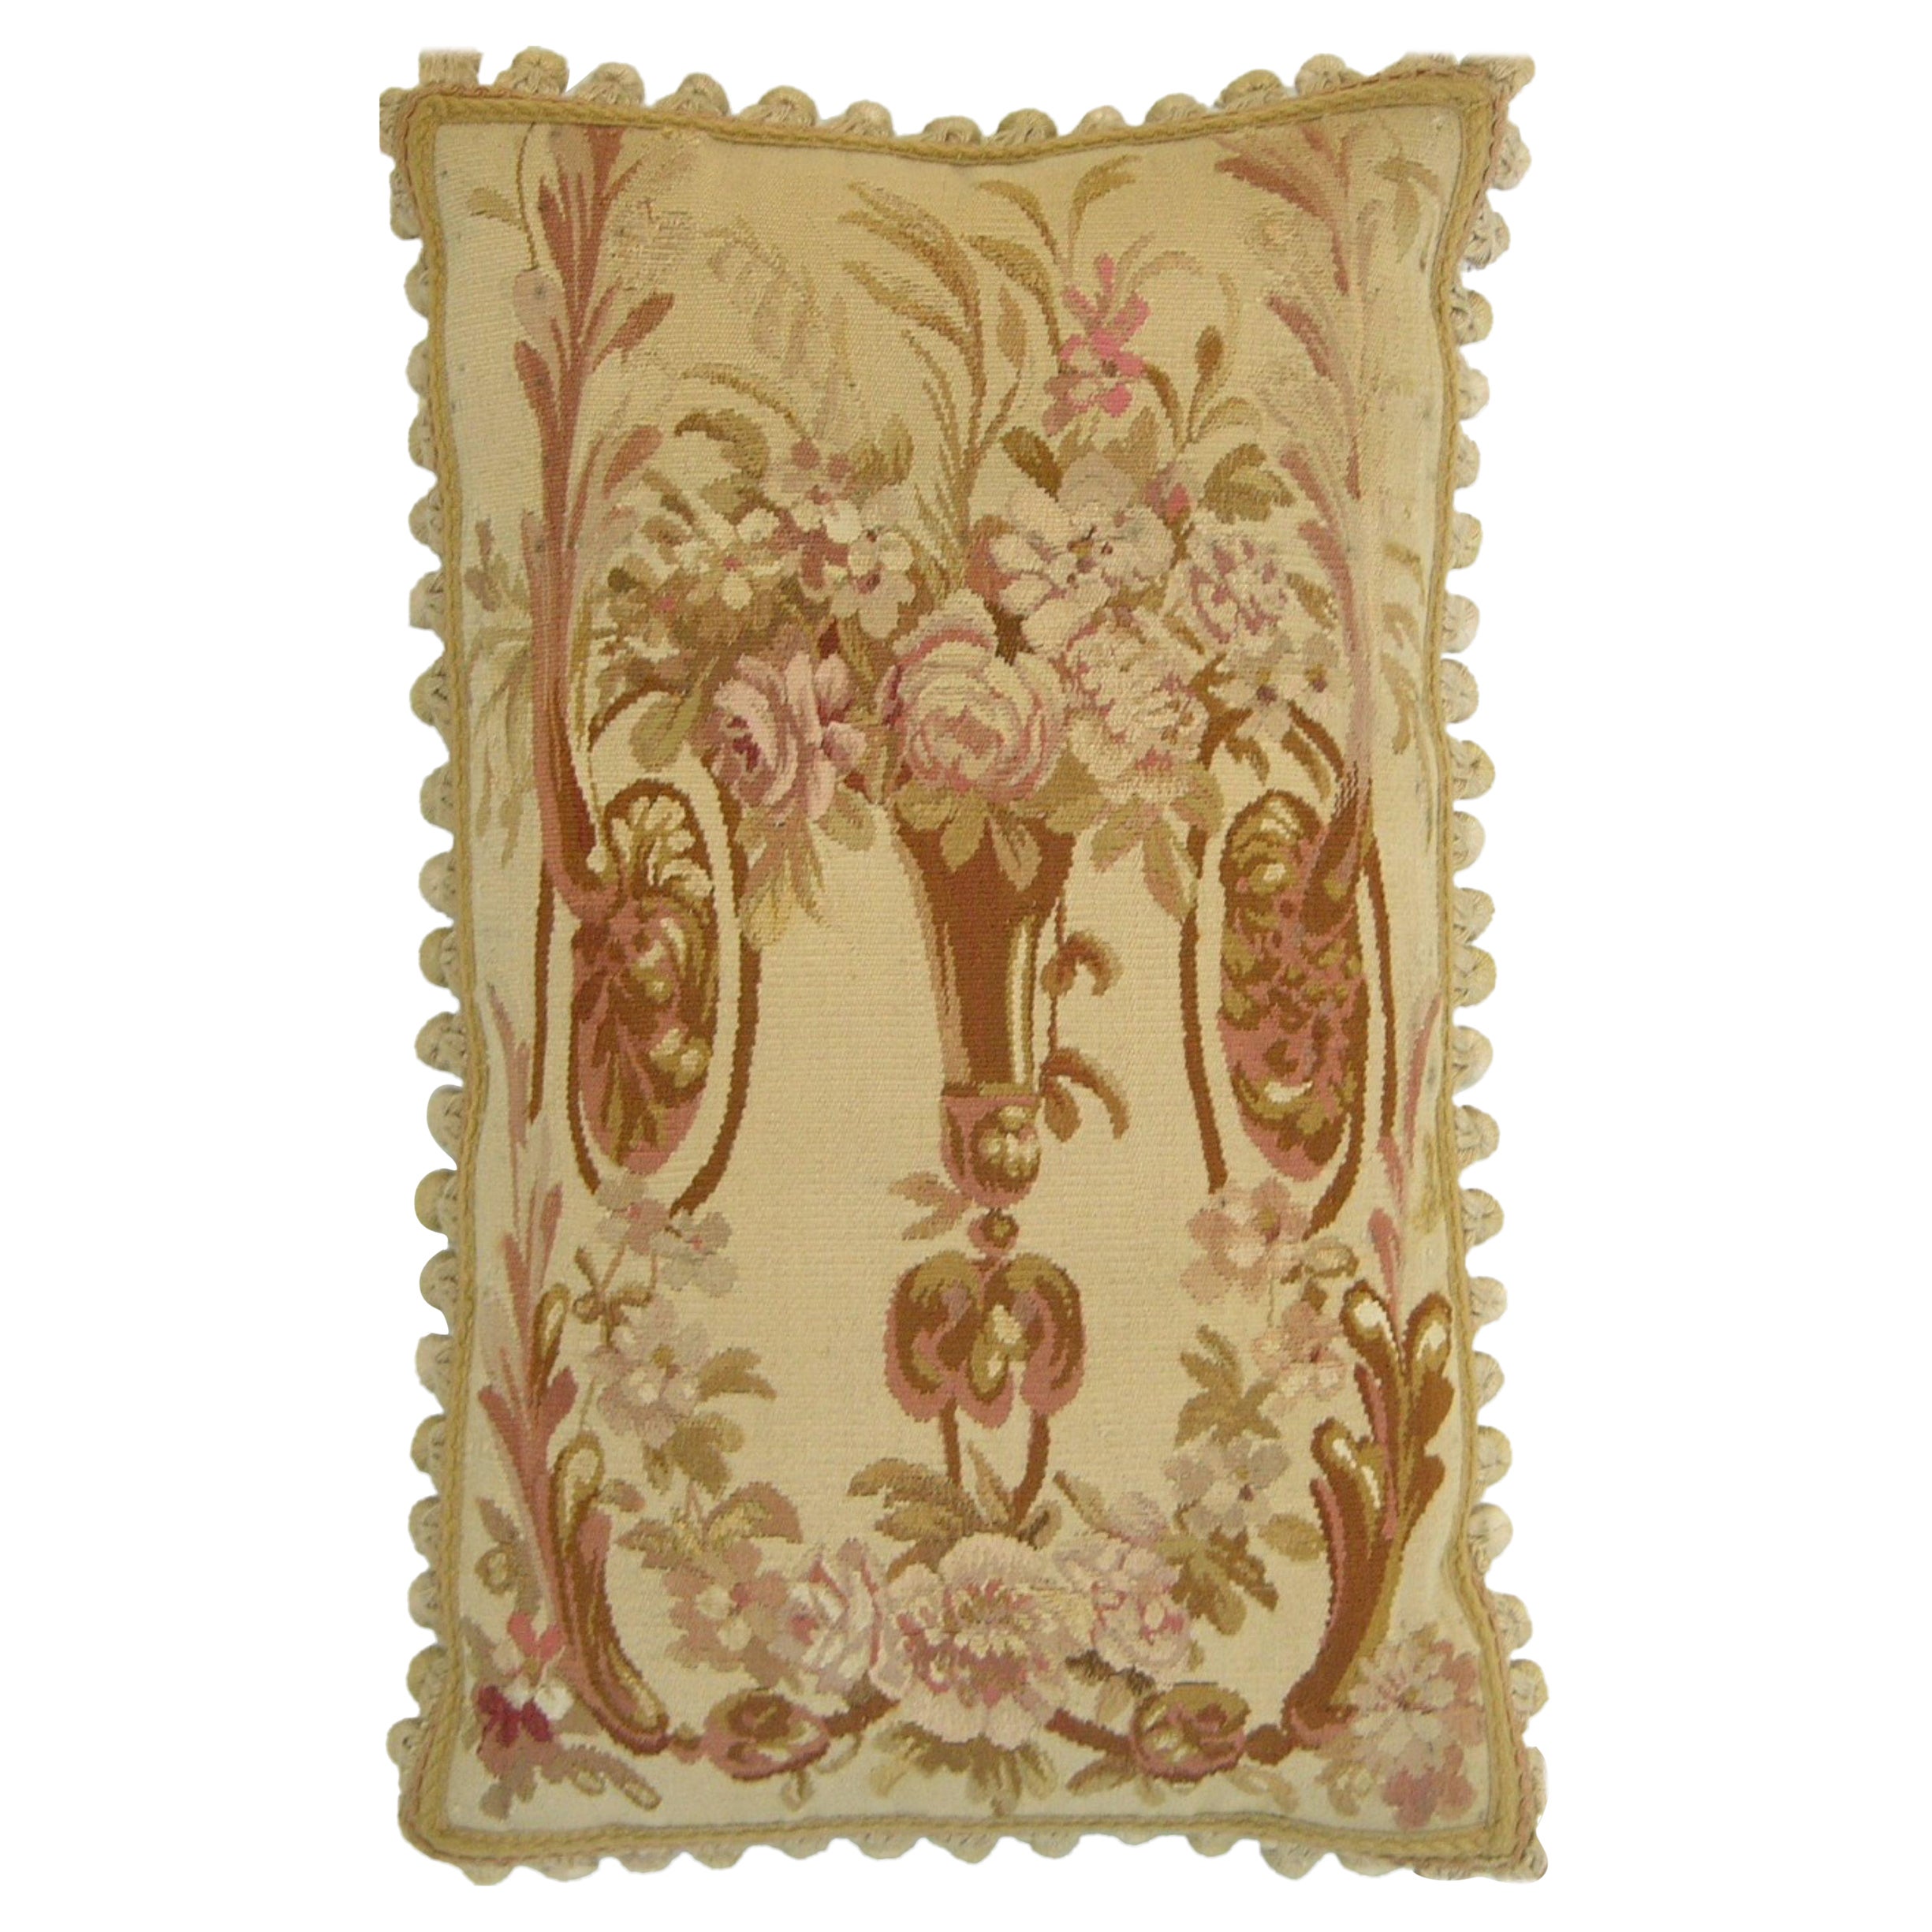 Circa 1870 Antique French Aubusson Tapestry Pillow For Sale